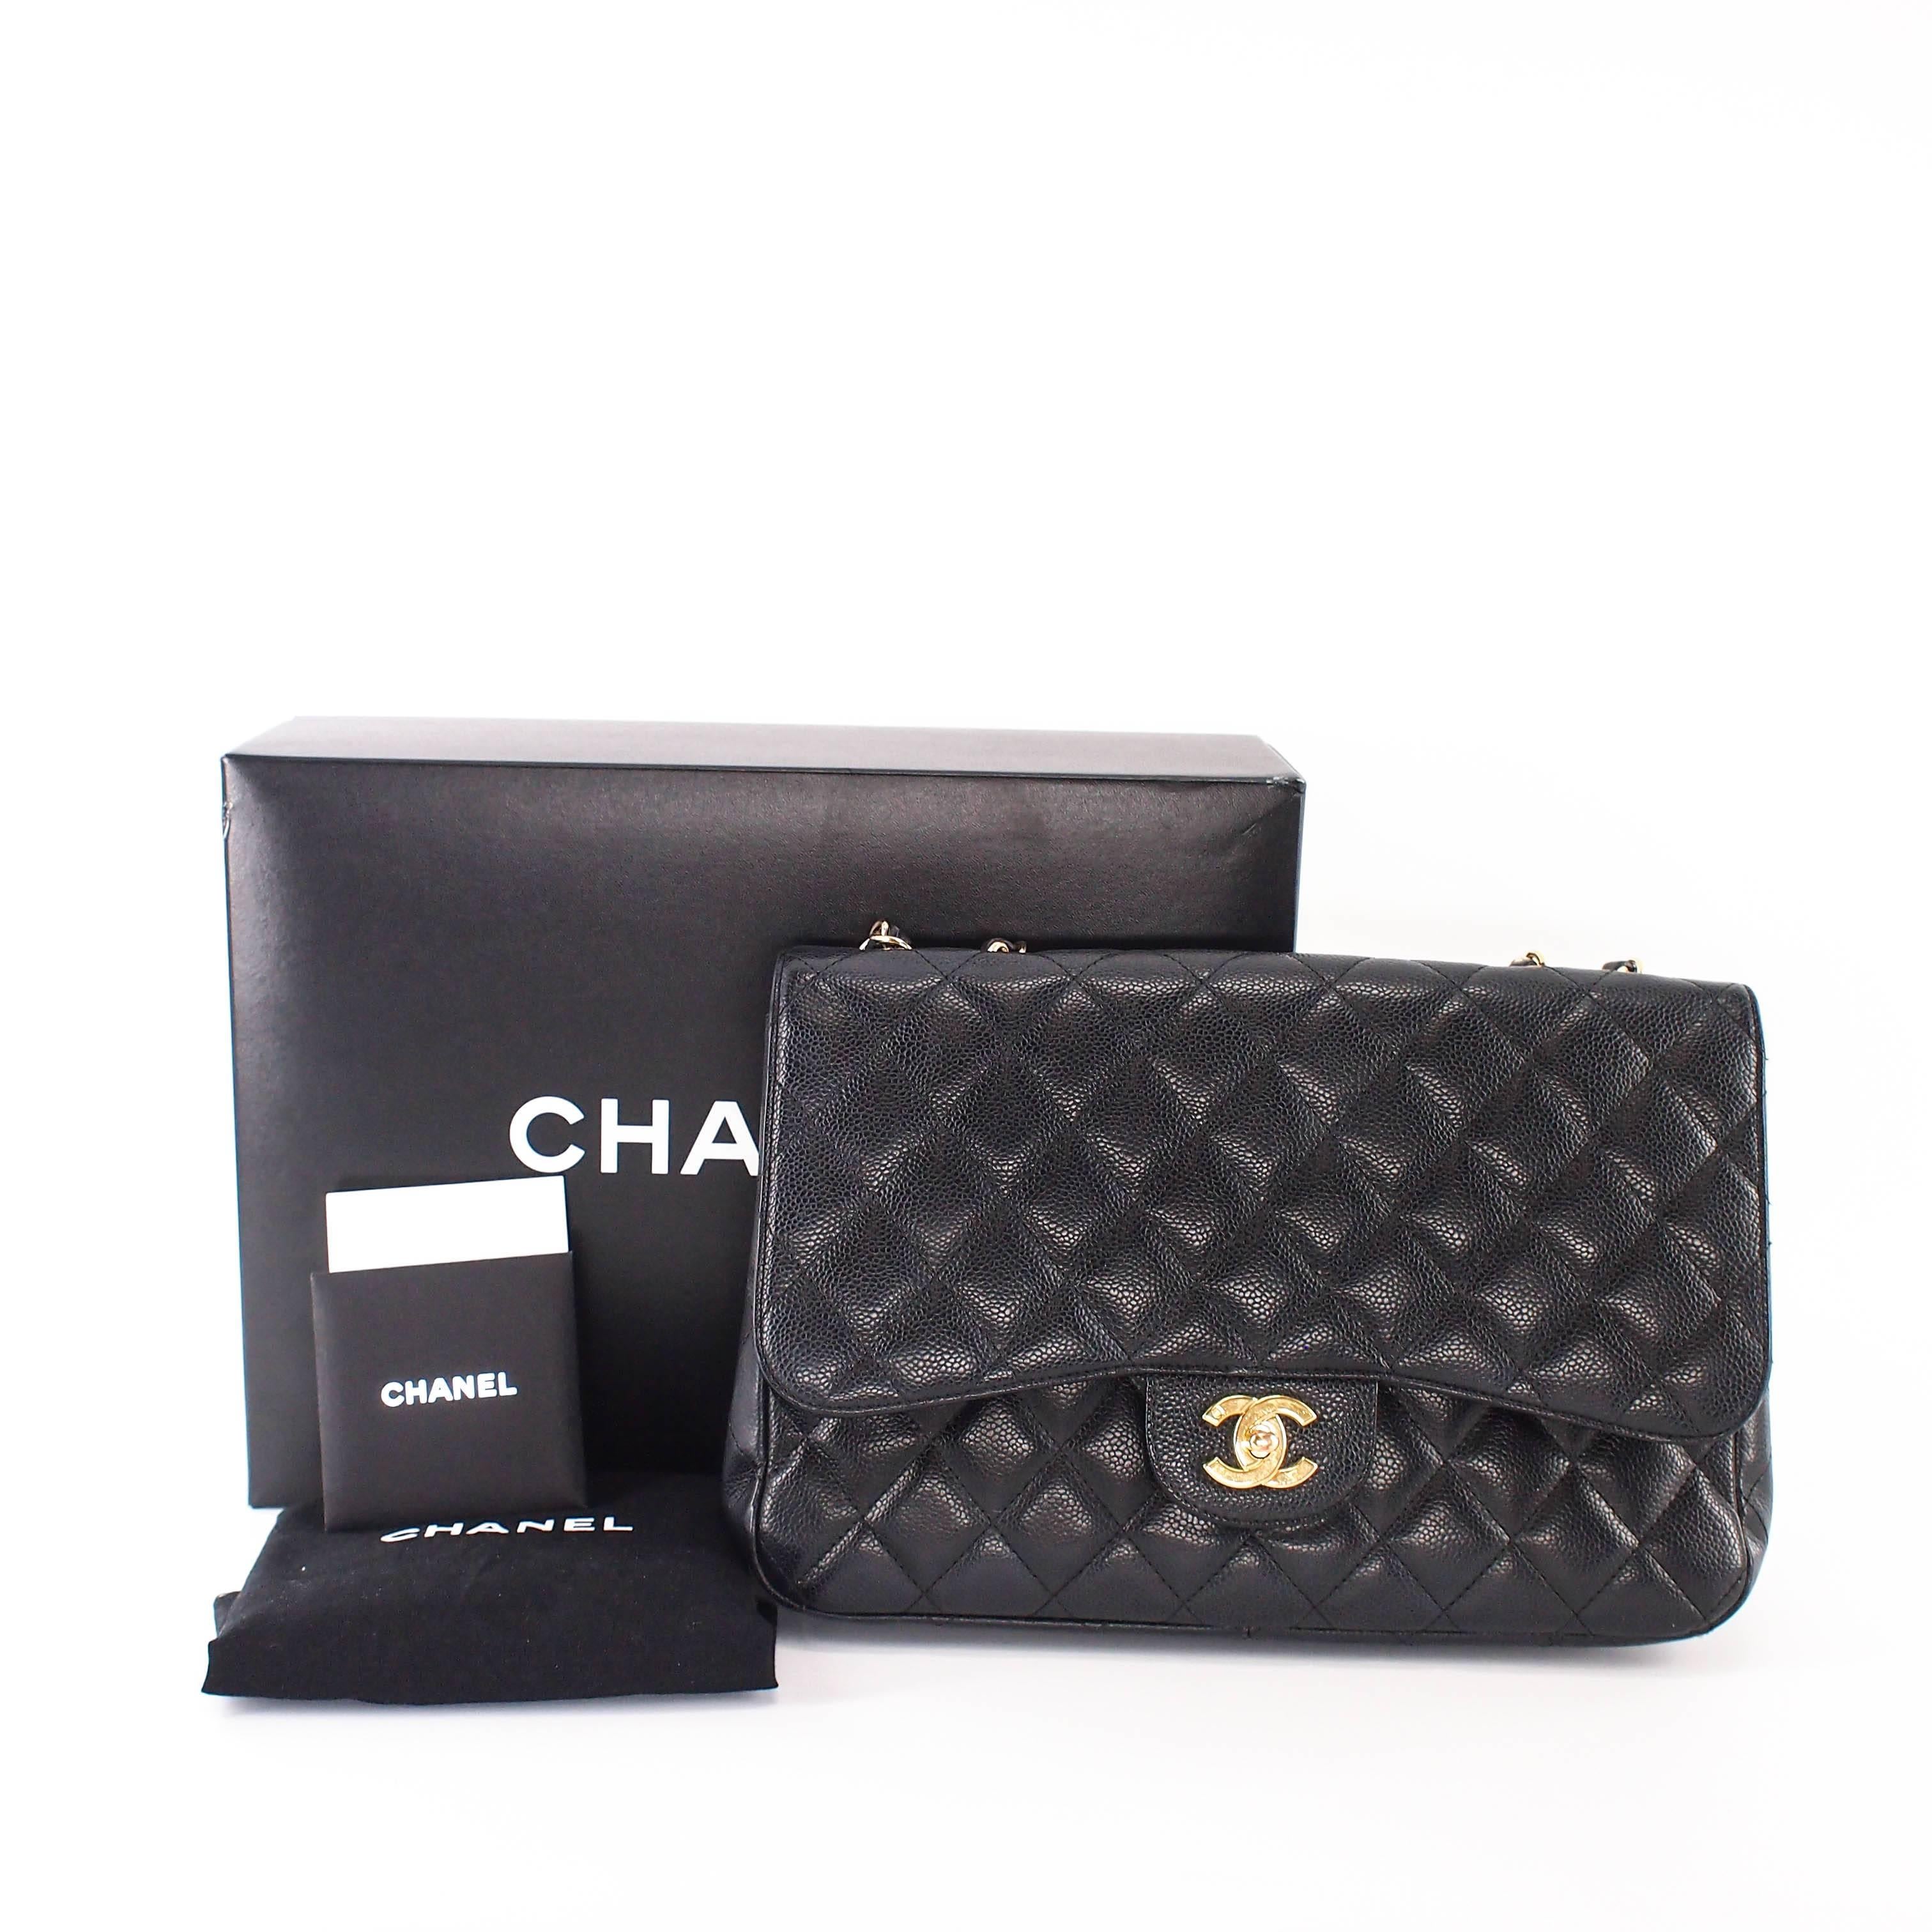 Why embrace trends when you can be a timeless classic? This Chanel Single Flap Jumbo Caviar is gorgeous, especially with its timeless gold hardware. Caviar leather is durable enough to be by your side long term. With its back flap pocket, two front